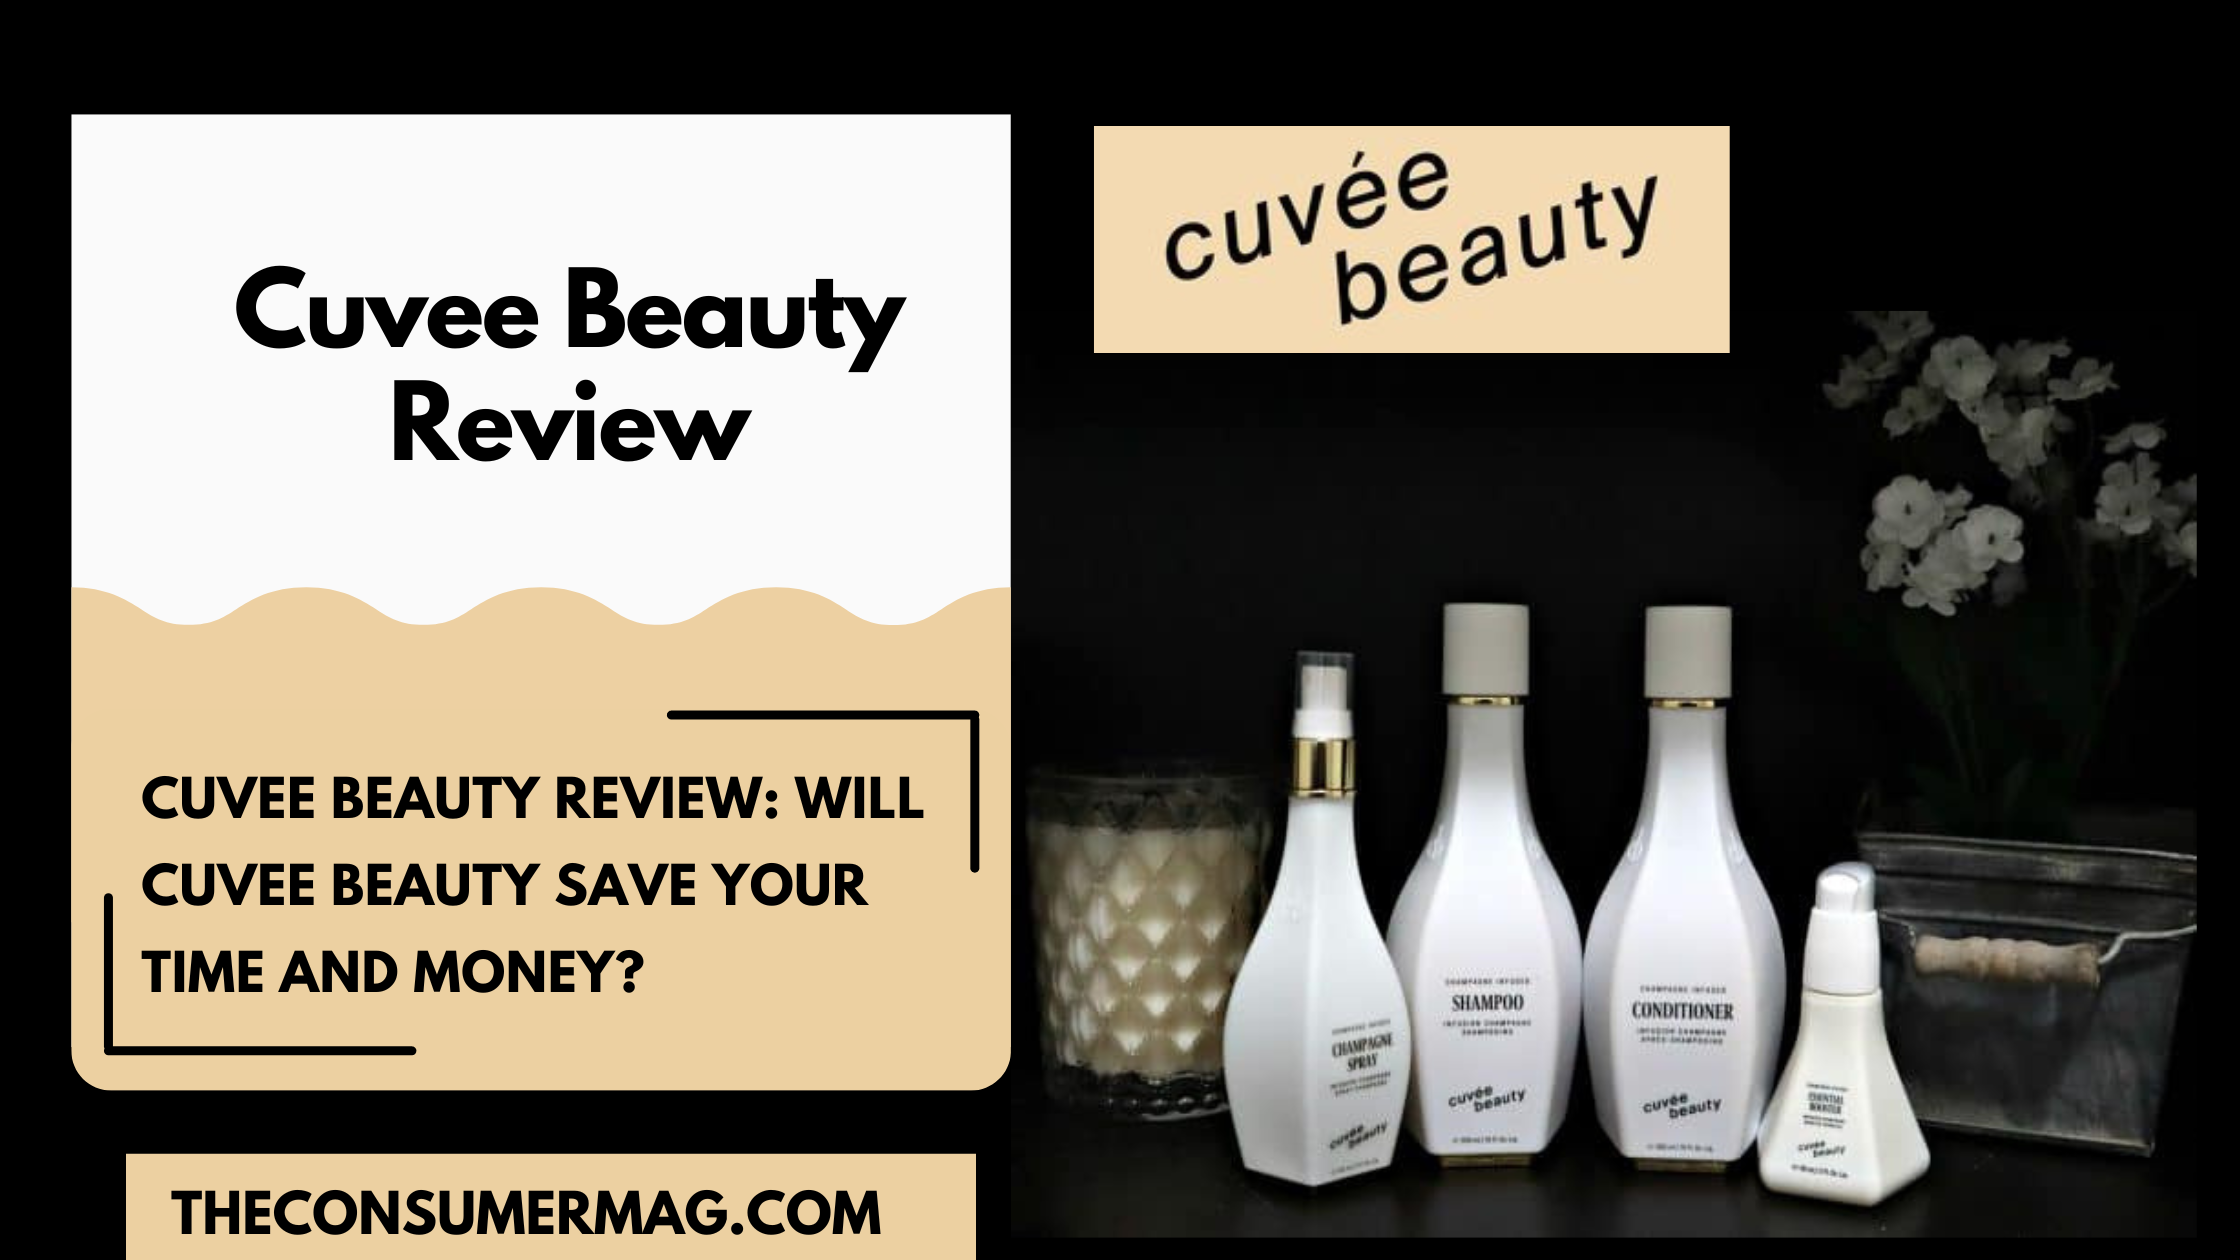 Cuvee Beauty featured image